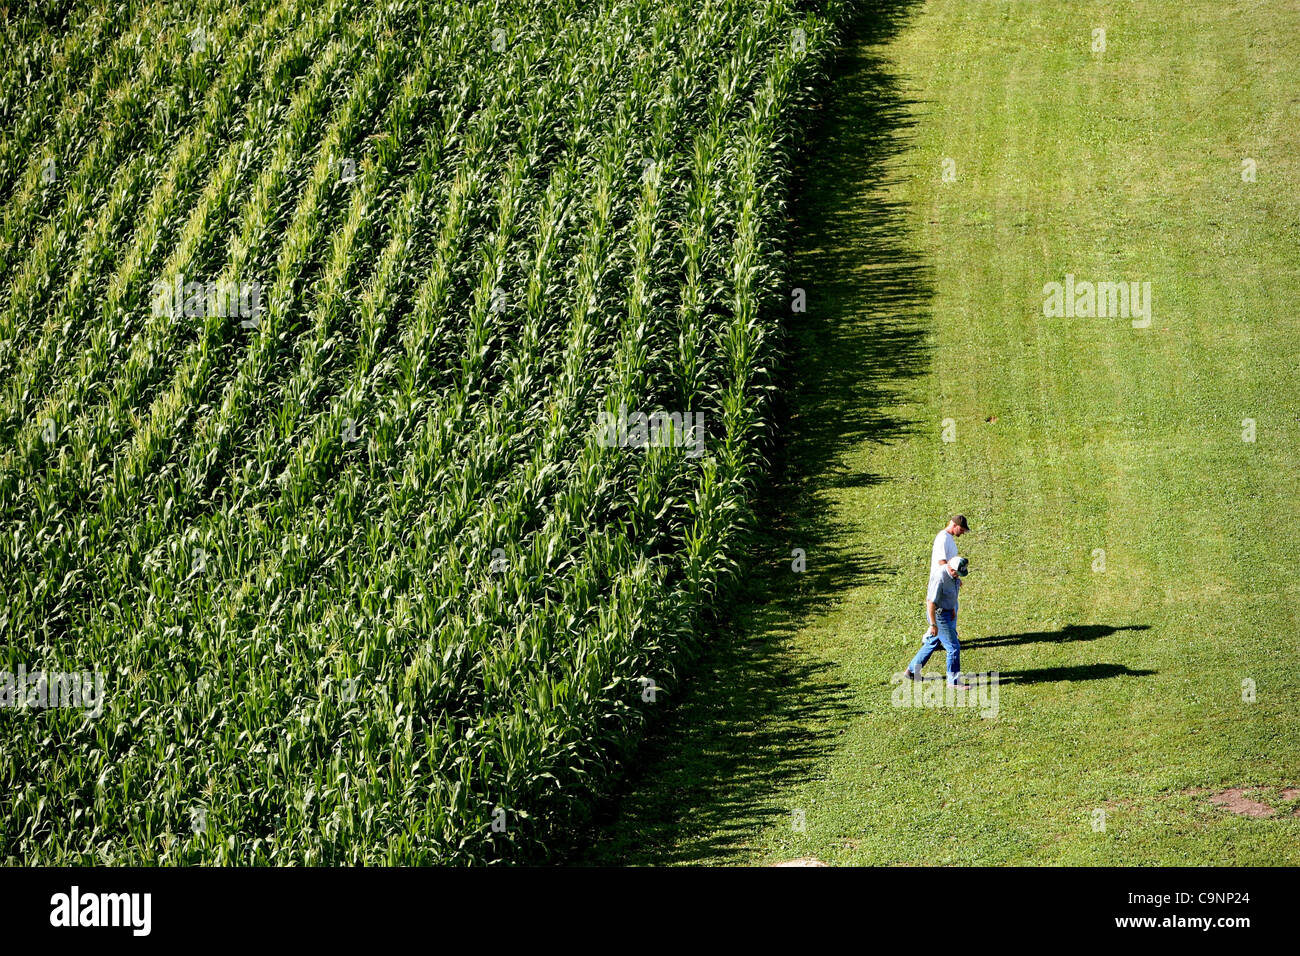 July 12, 2007 - Dixon, Illinois, USA -  Kyle Sheaffer, 28, grows corn and soybeans with his father, Jim Sheaffer, 60, on 2500 acres outside Dixon, Illinois. (Credit Image: © Sally Ryan/ZUMA Press) Stock Photo